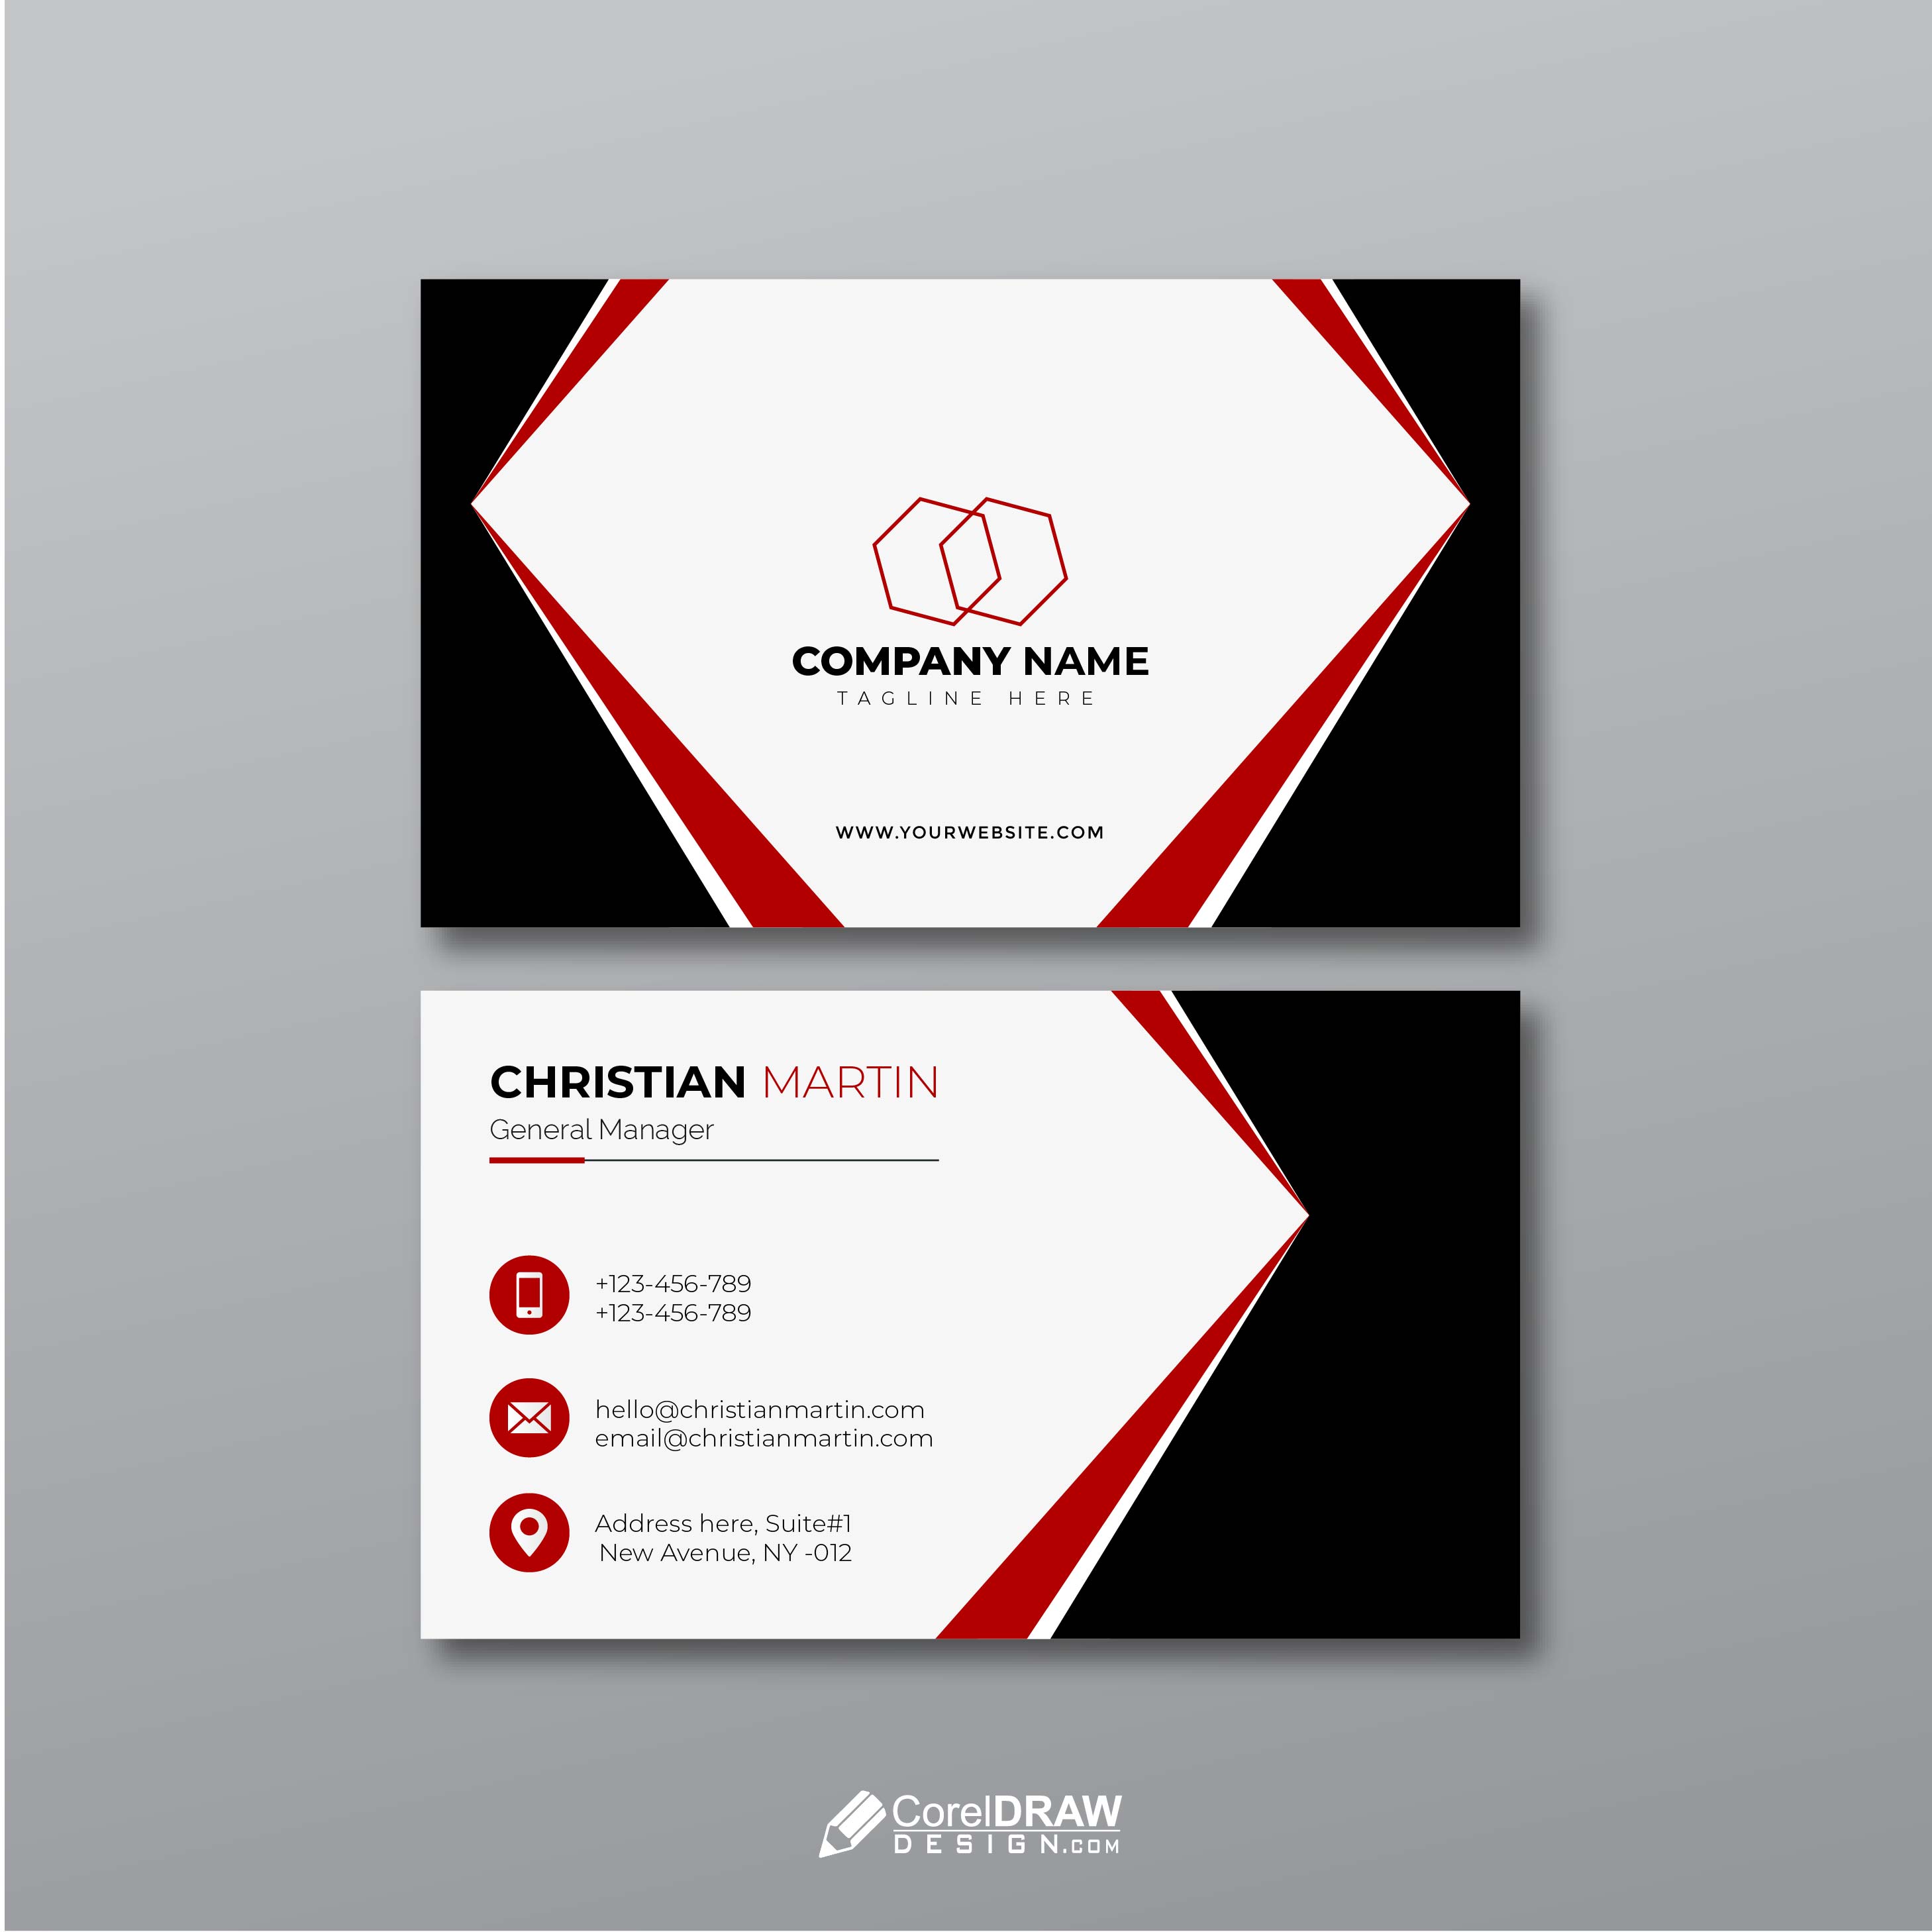 Abstract Diamond Shape Corporate Business Card Template